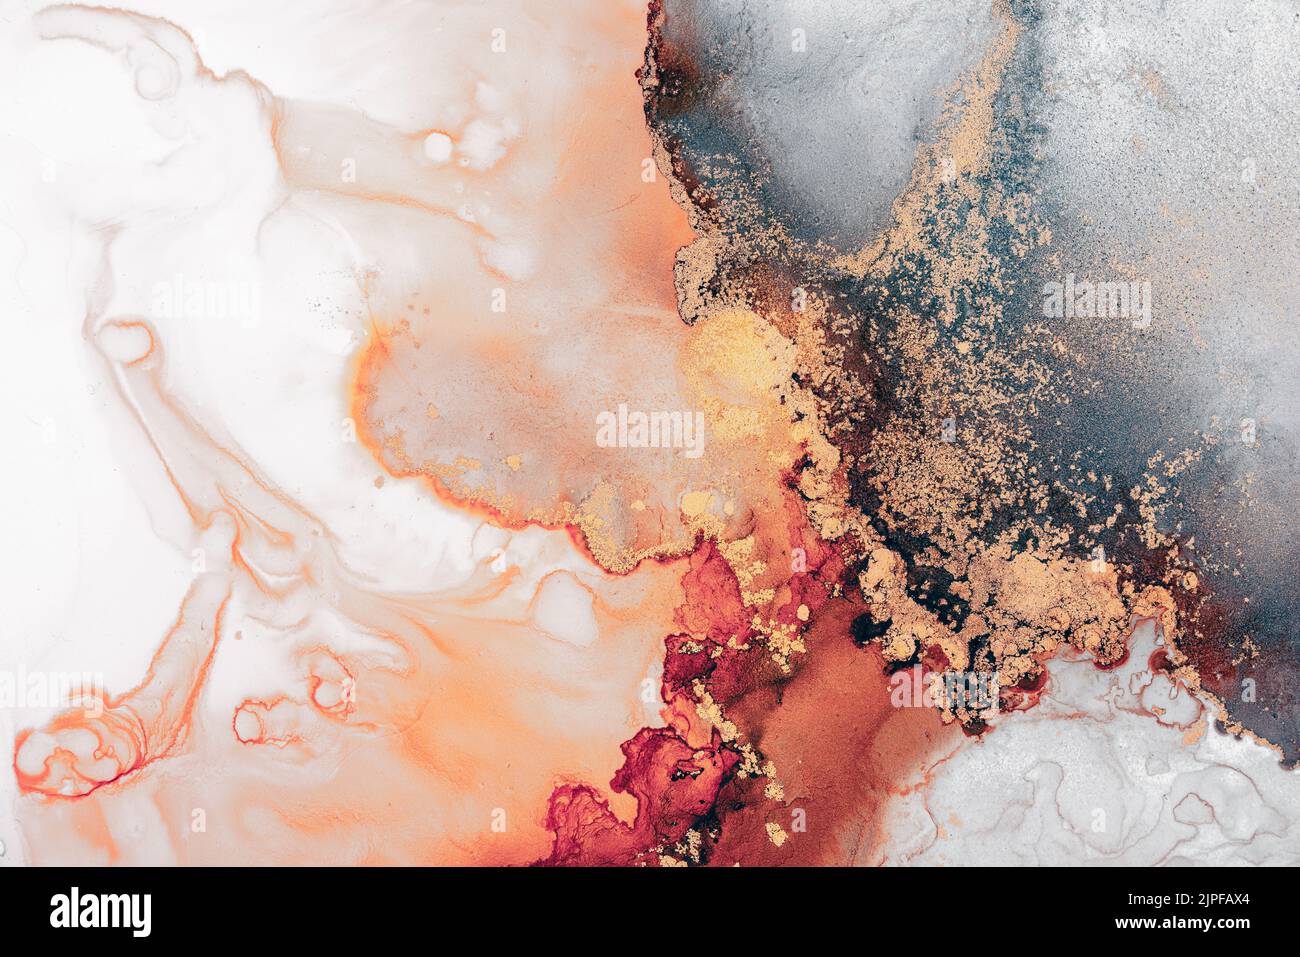 Burning abstract background from marble ink art of exquisite original painting . Painting was painted on high quality paper texture to create smooth Stock Photo